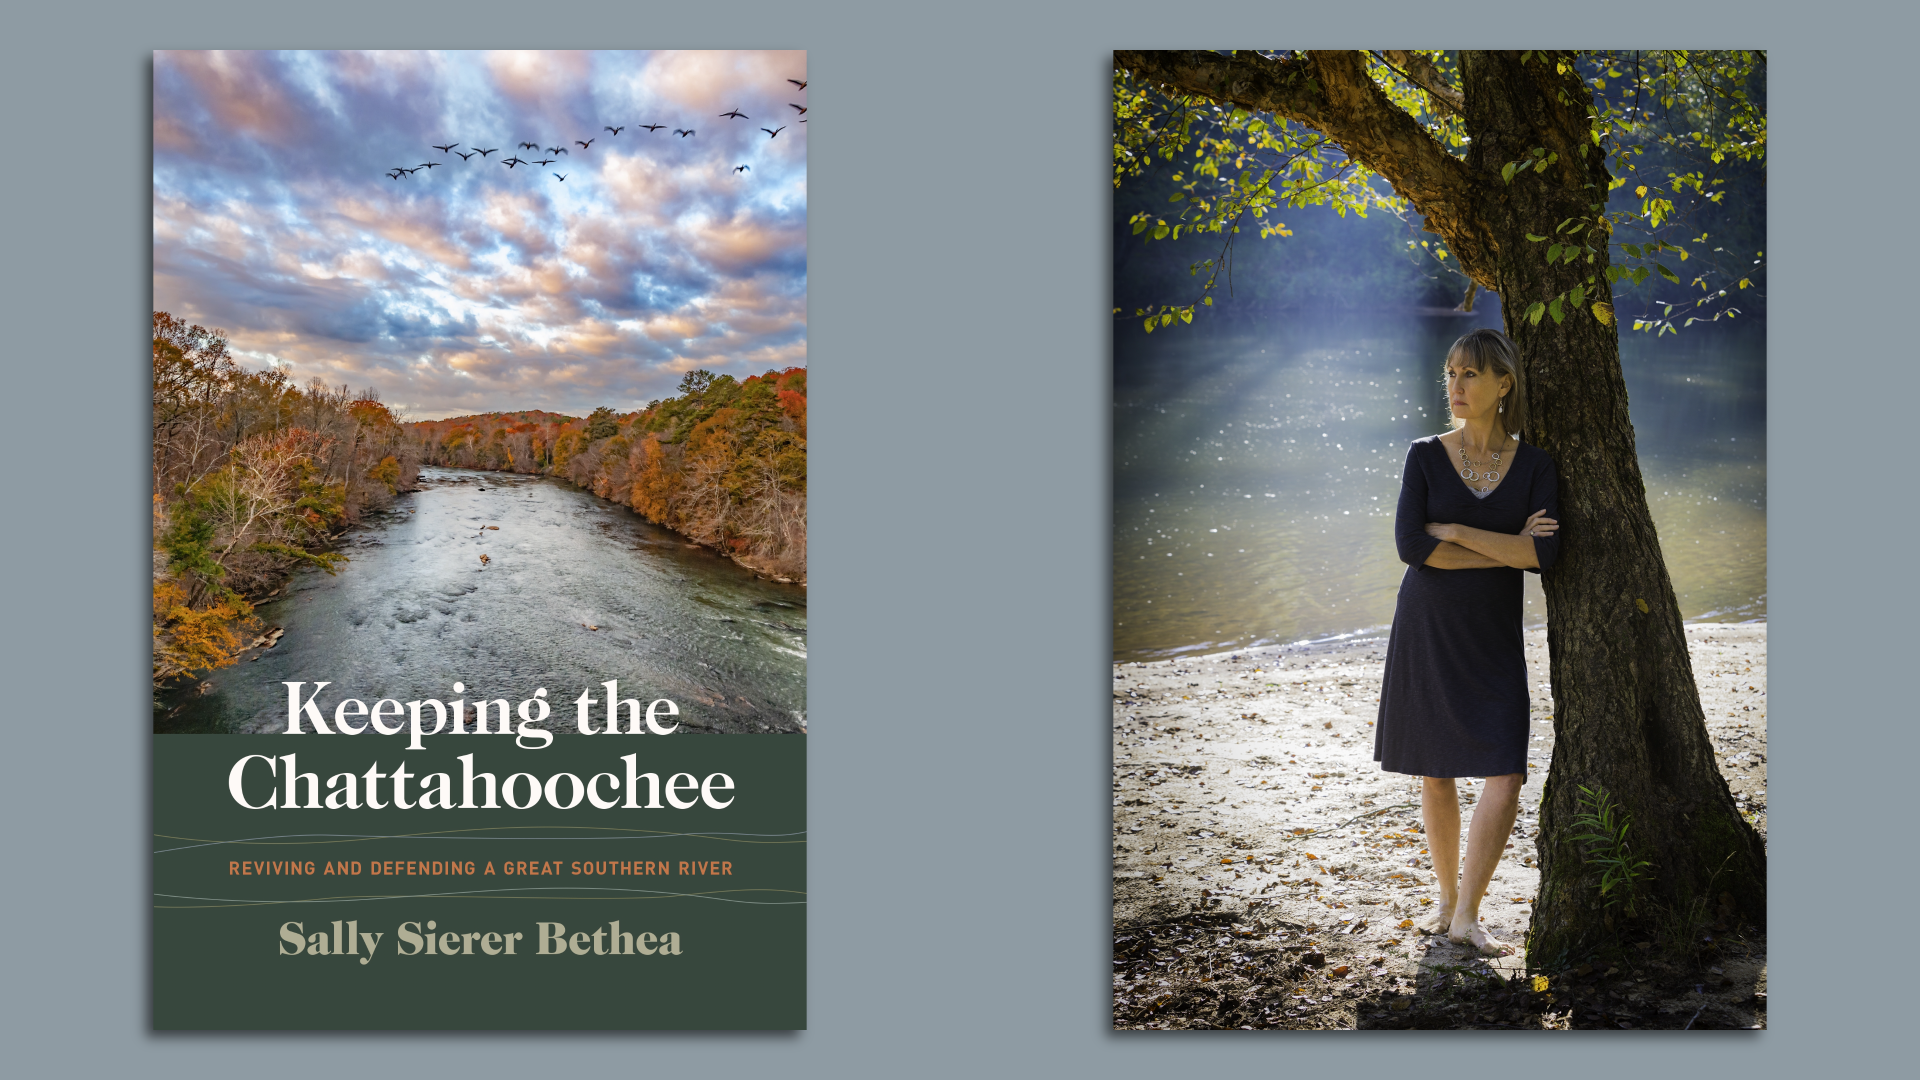 Side by side photos of a book with the title "Keeping the Chattahoochee" and Sally Bethea leaning against a shade tree next to a river